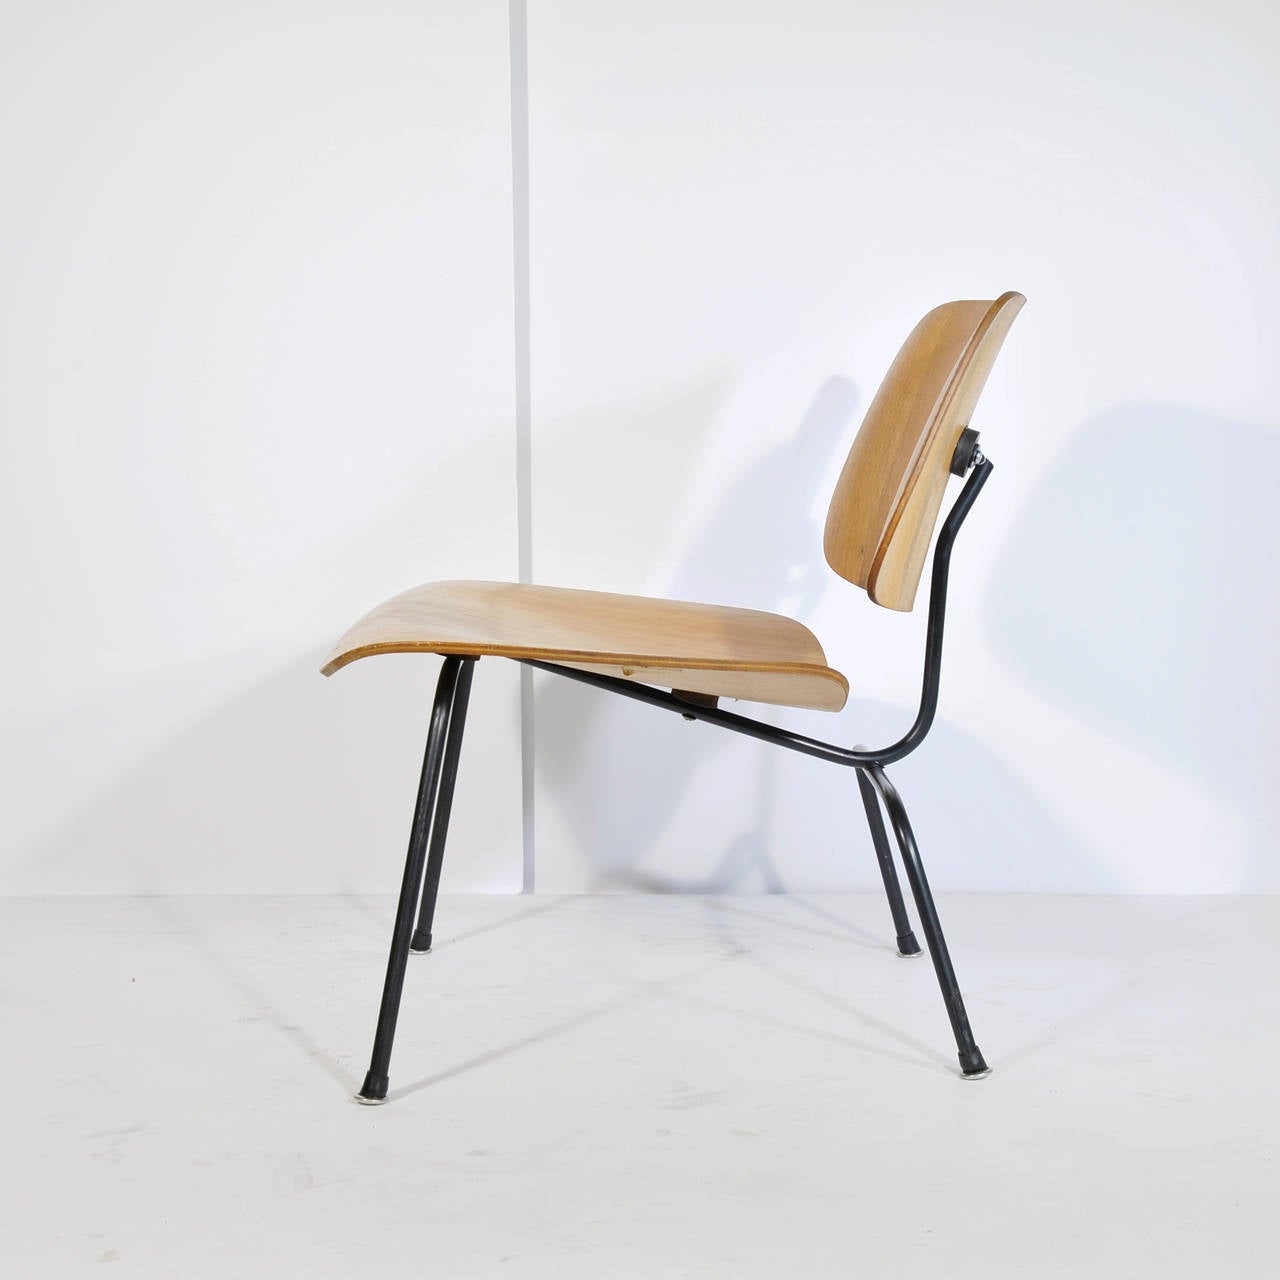 Early edition of Eames plywood LCM, iconic item of the 20th.
Classic vintage modern chairs designed by Charles and Ray Eames and made by Herman Miller. Labeled LCM (Lounge Chair Metal) with bentwood seat and back with black iron frames.
Please